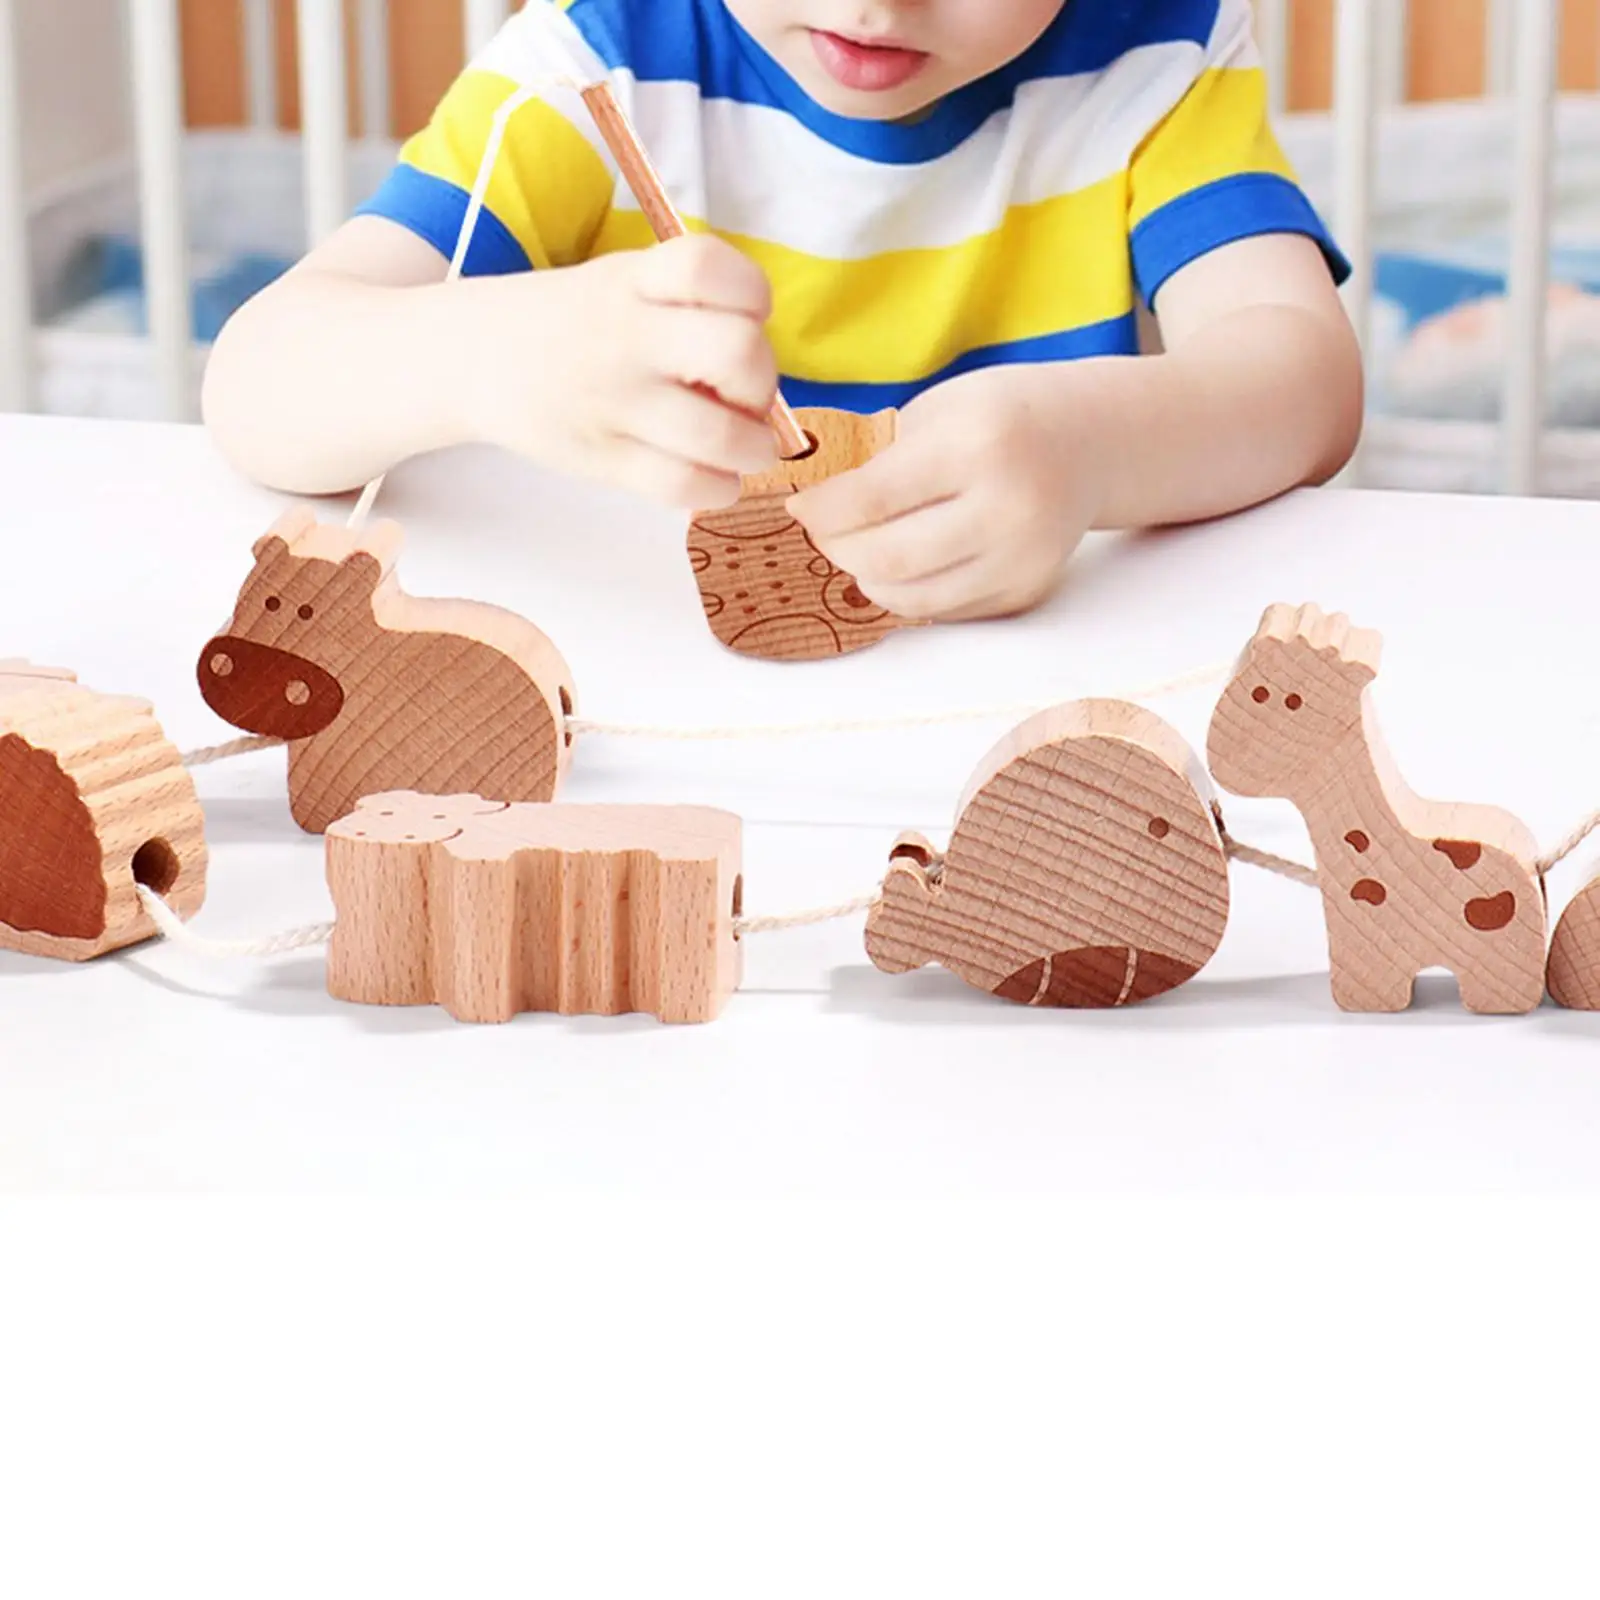 16 Pieces Animal Blocks Threading Toy Wooden Stacker Game for Birthday Gift